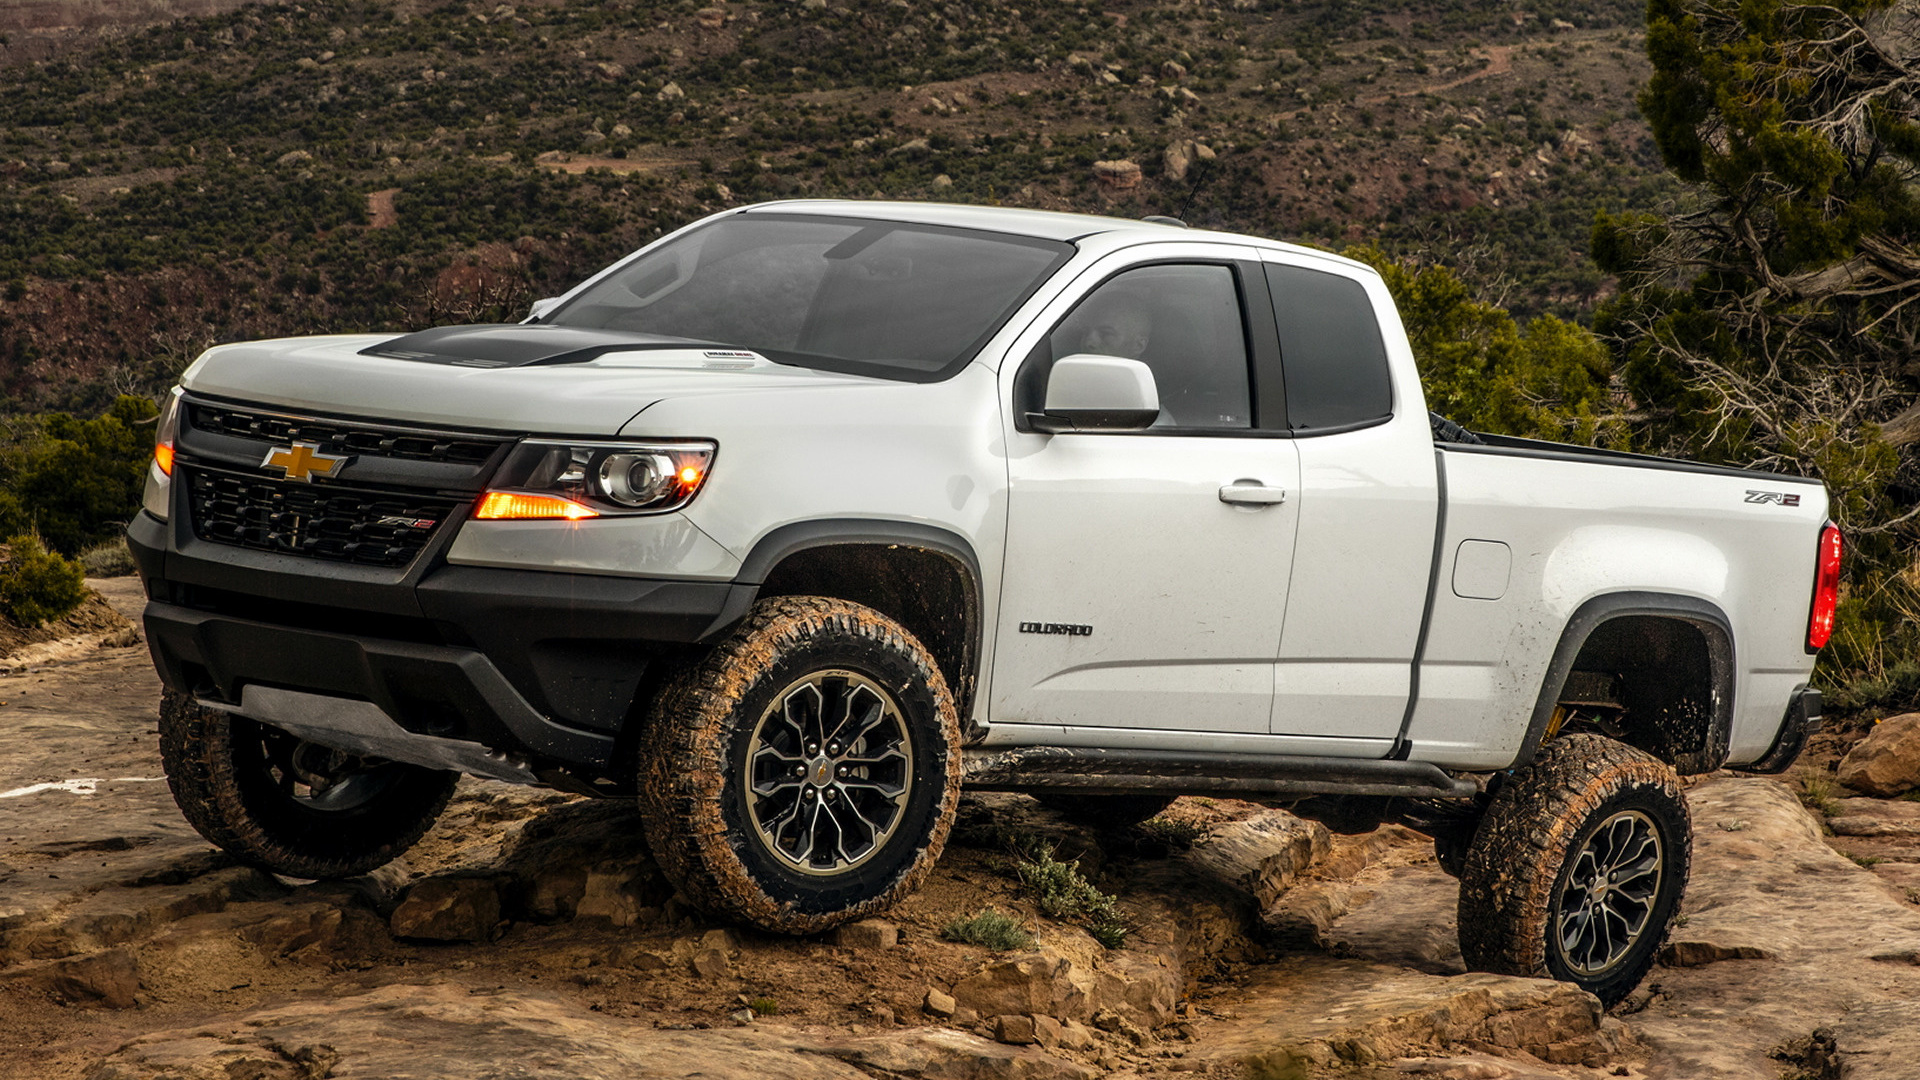 2017 Chevrolet Colorado ZR2 Extended Cab Wallpapers and 